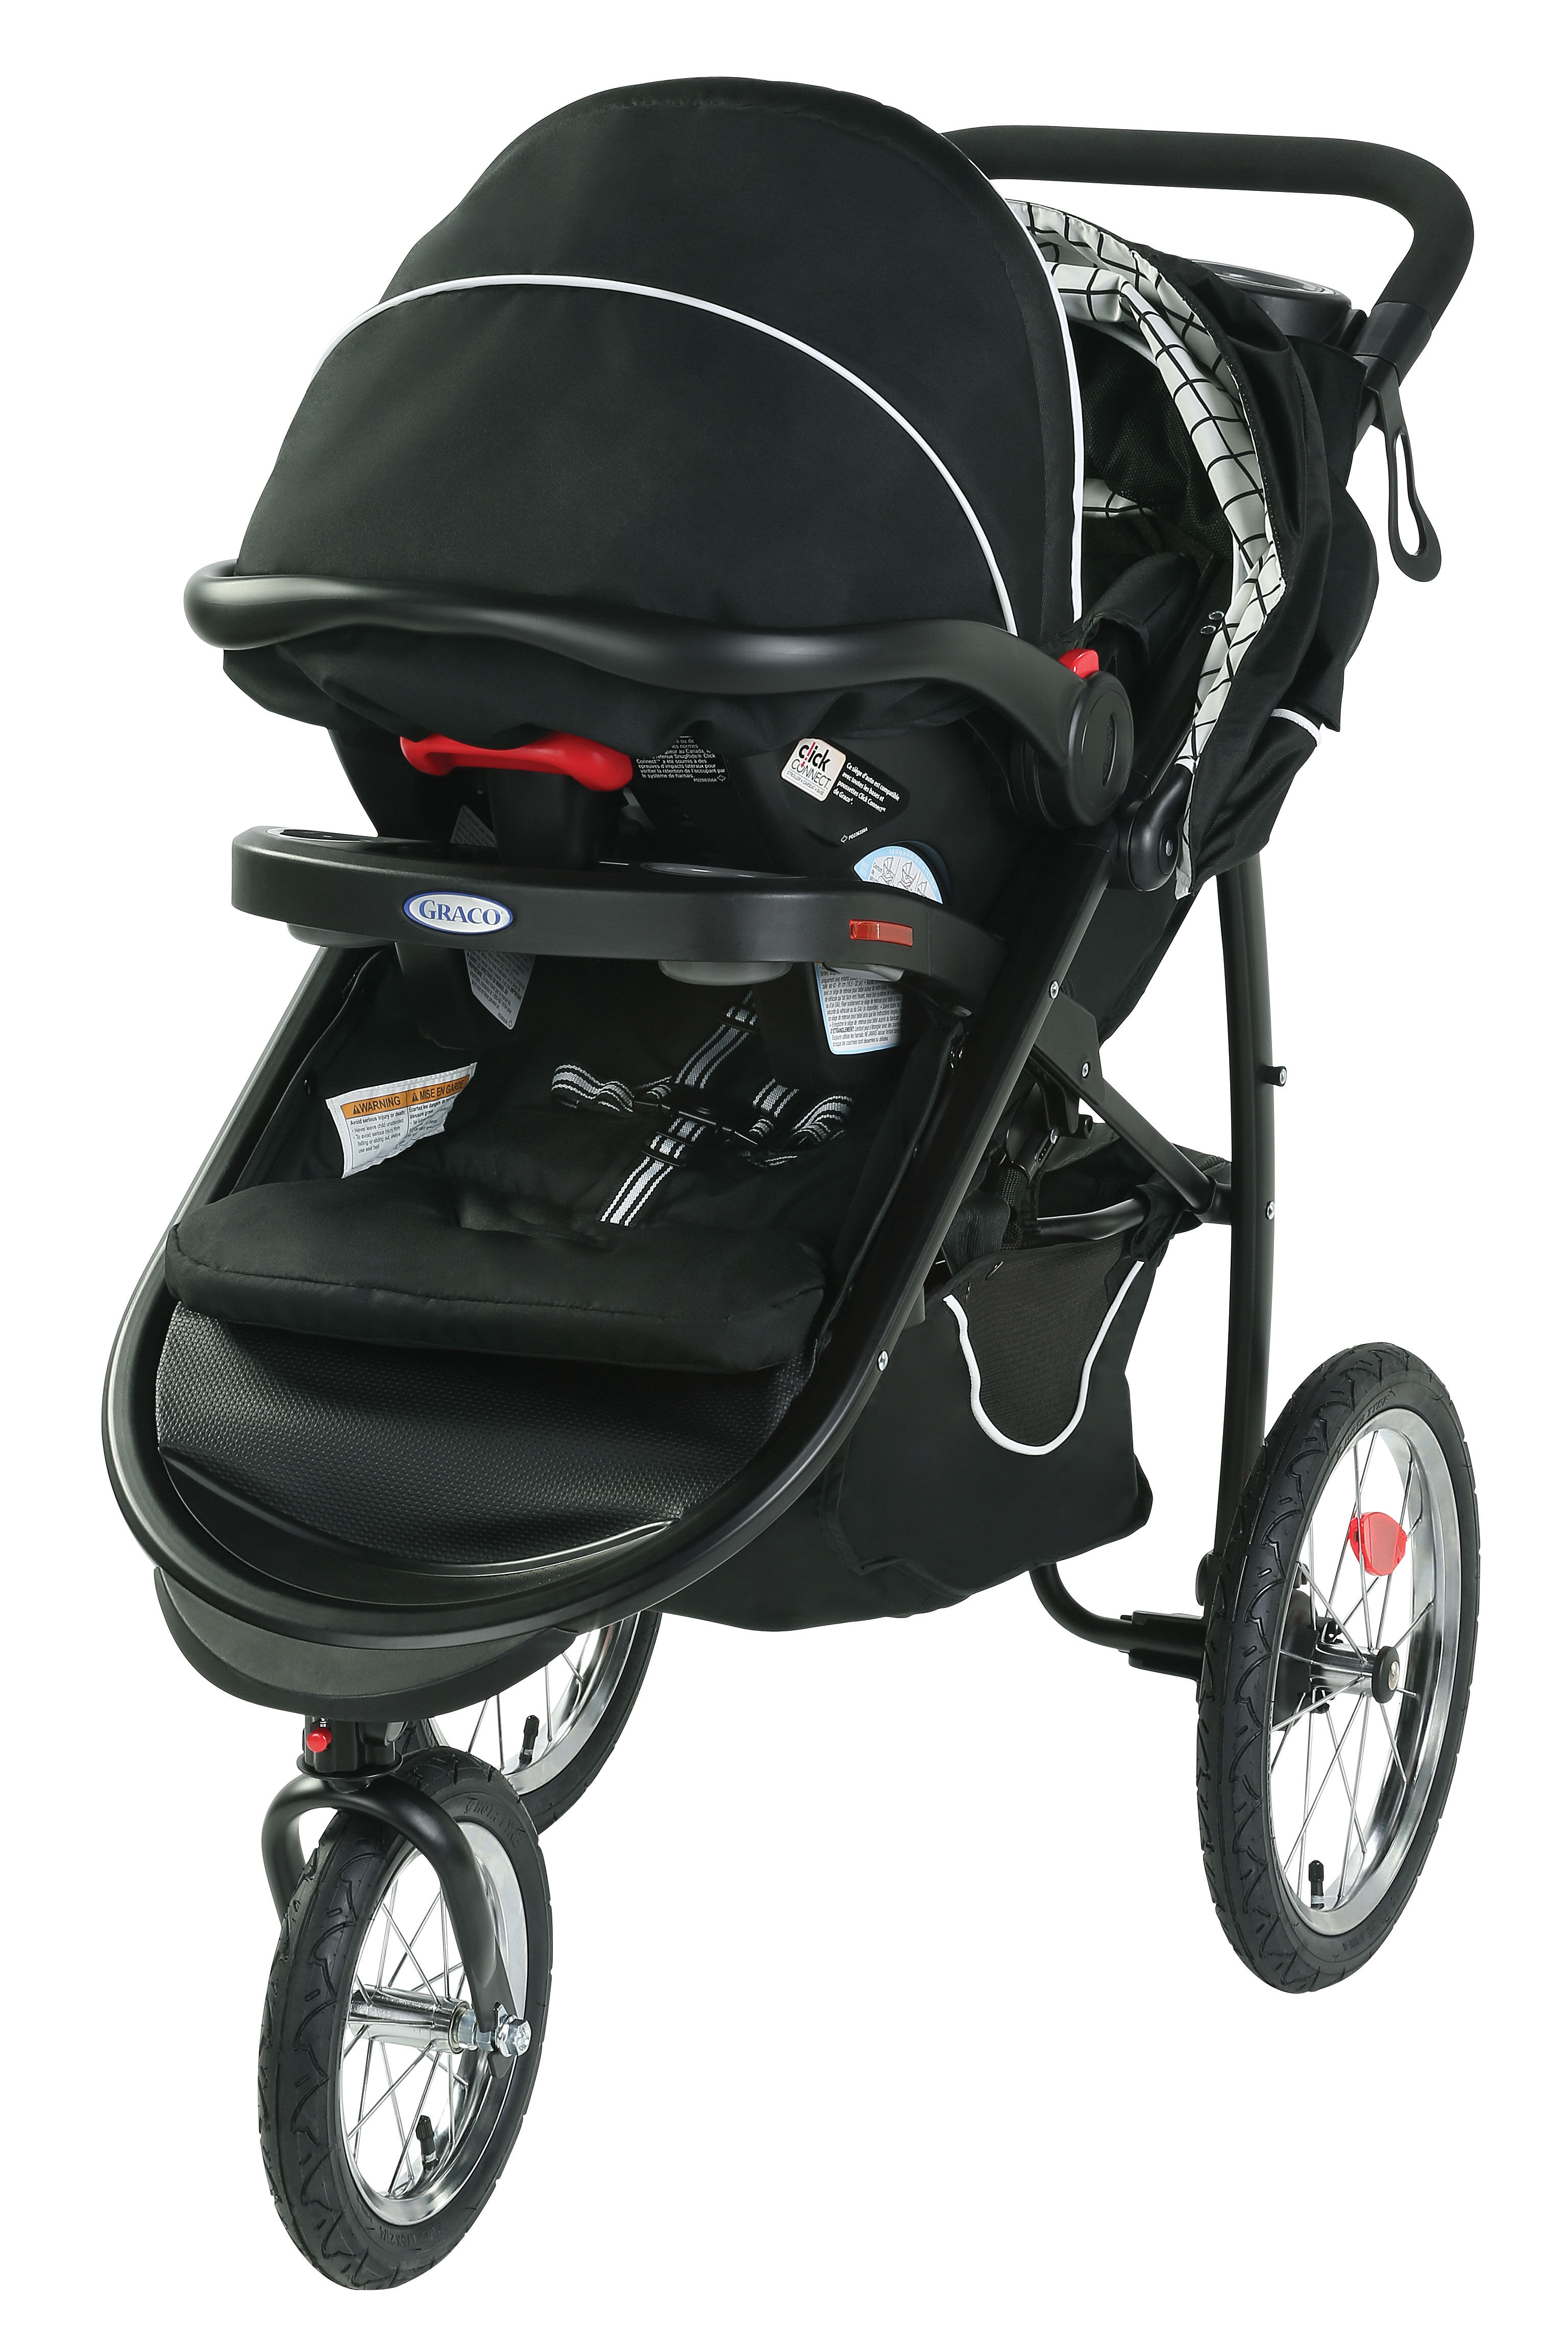 graco fit fold travel system